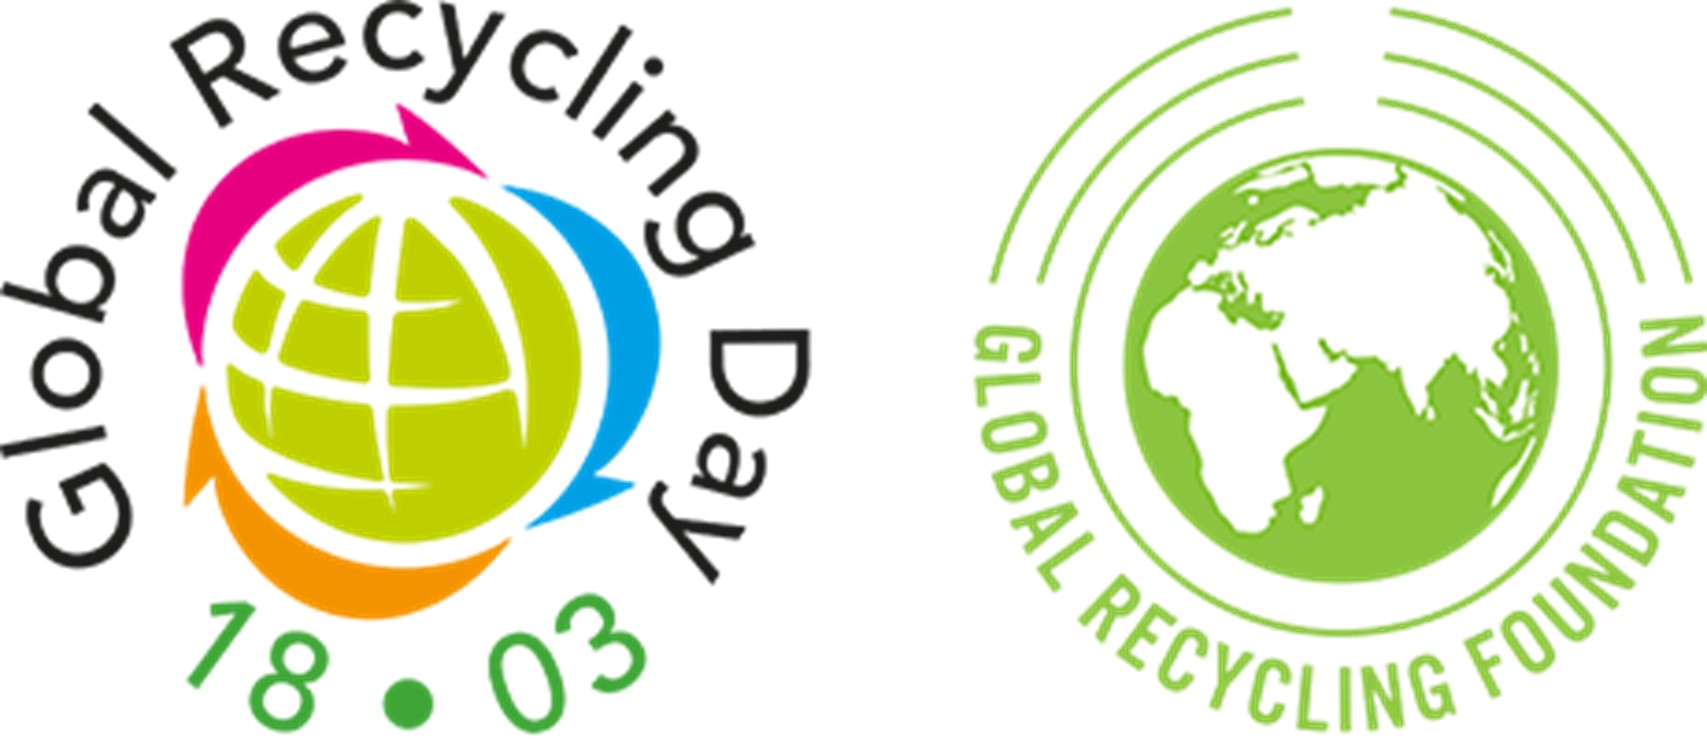 lg-energy-solutions-journey-for-sustainable-life-through-battery-reuse-and-recycling_1.jpg